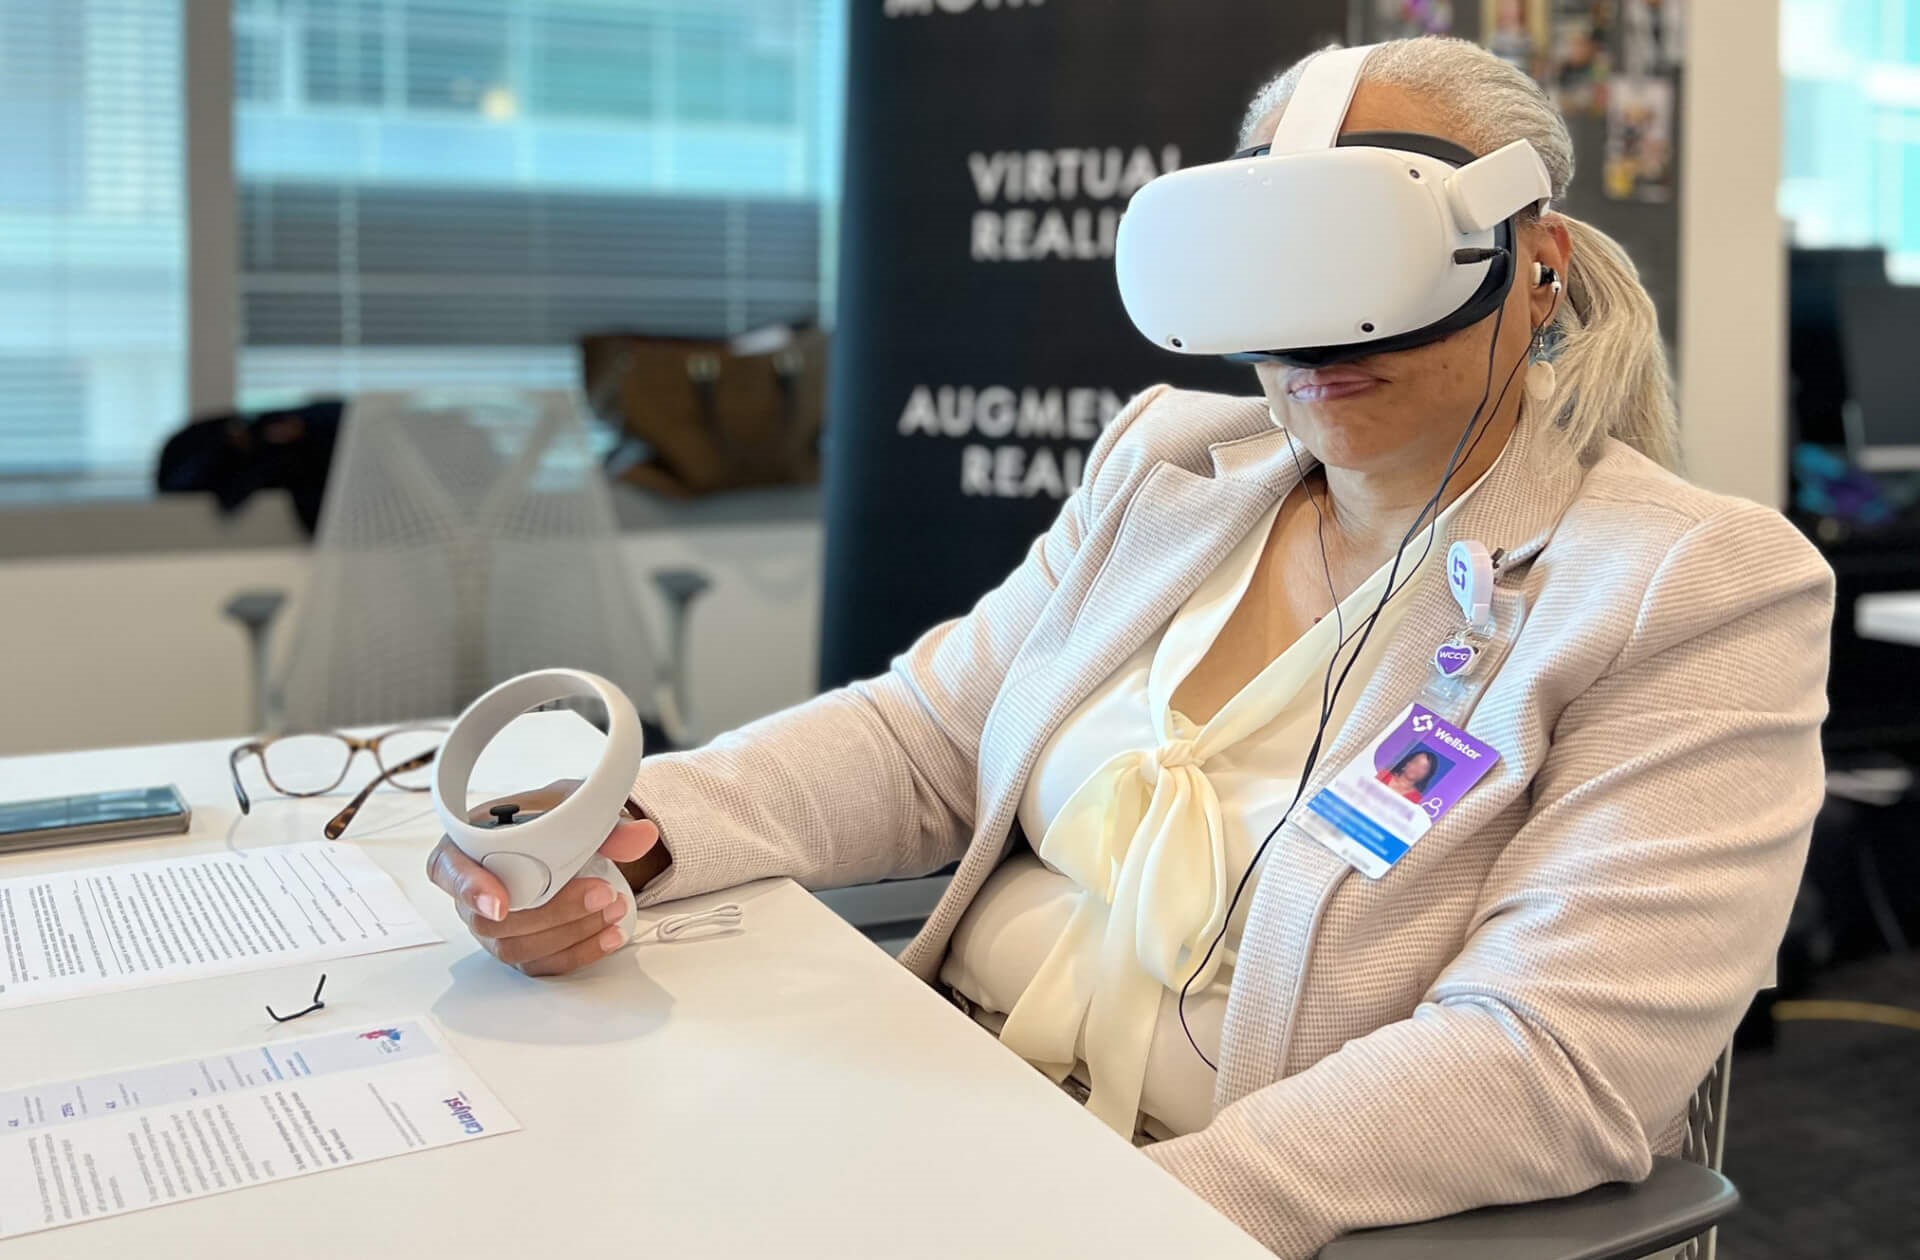 Female healthcare worker wearing Moth+Flame virtual reality device